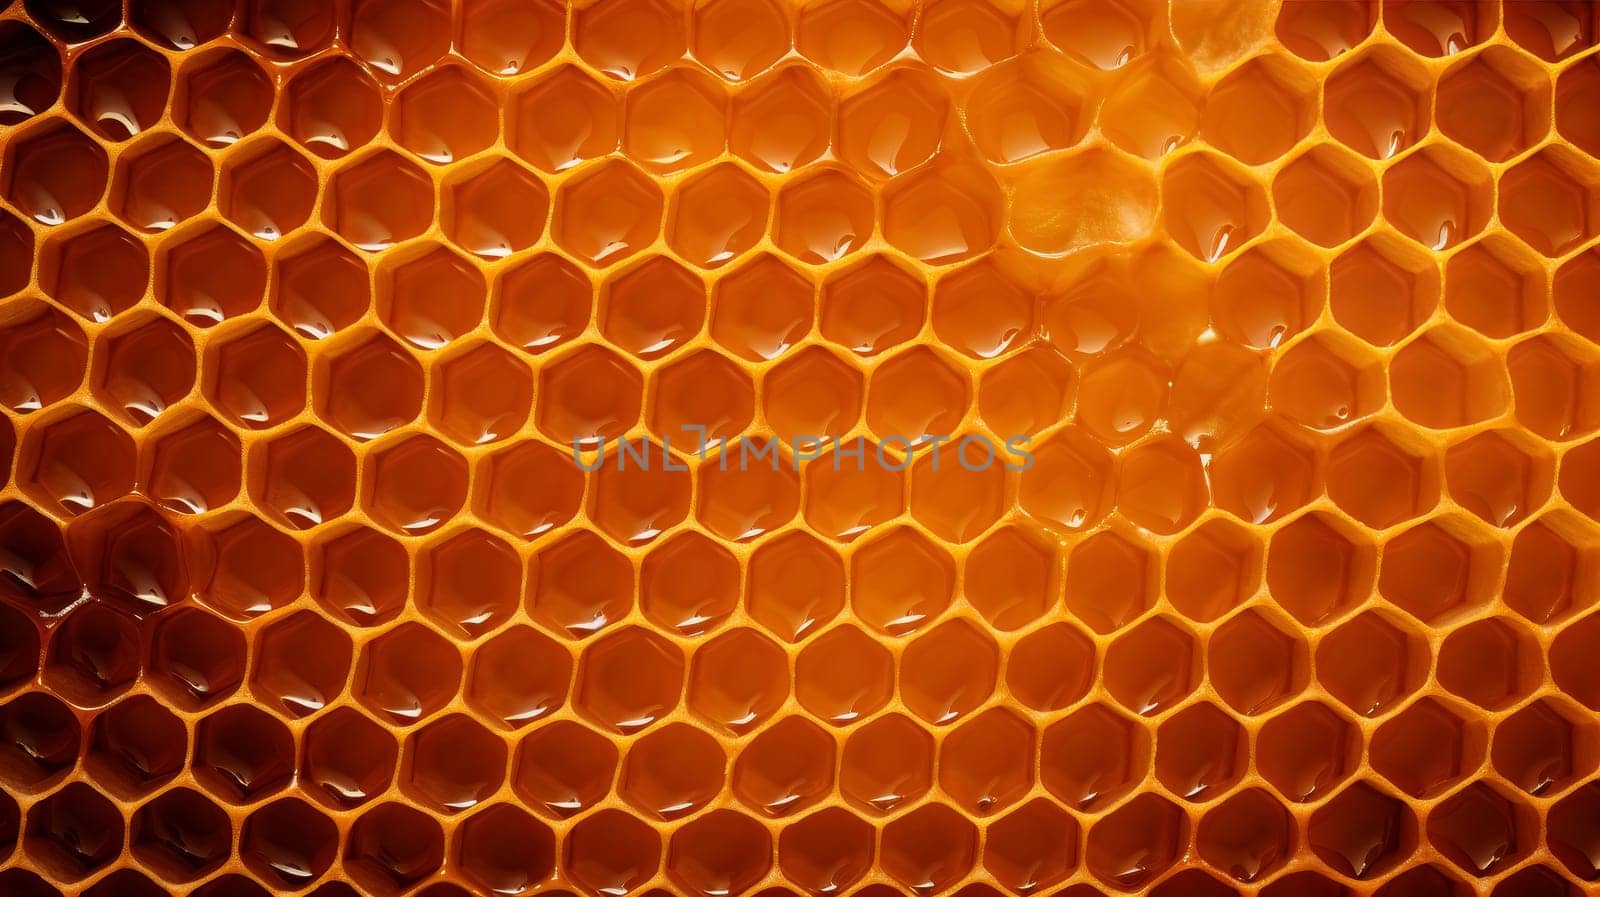 Honeycomb Pattern Filled with Honey by andreyz